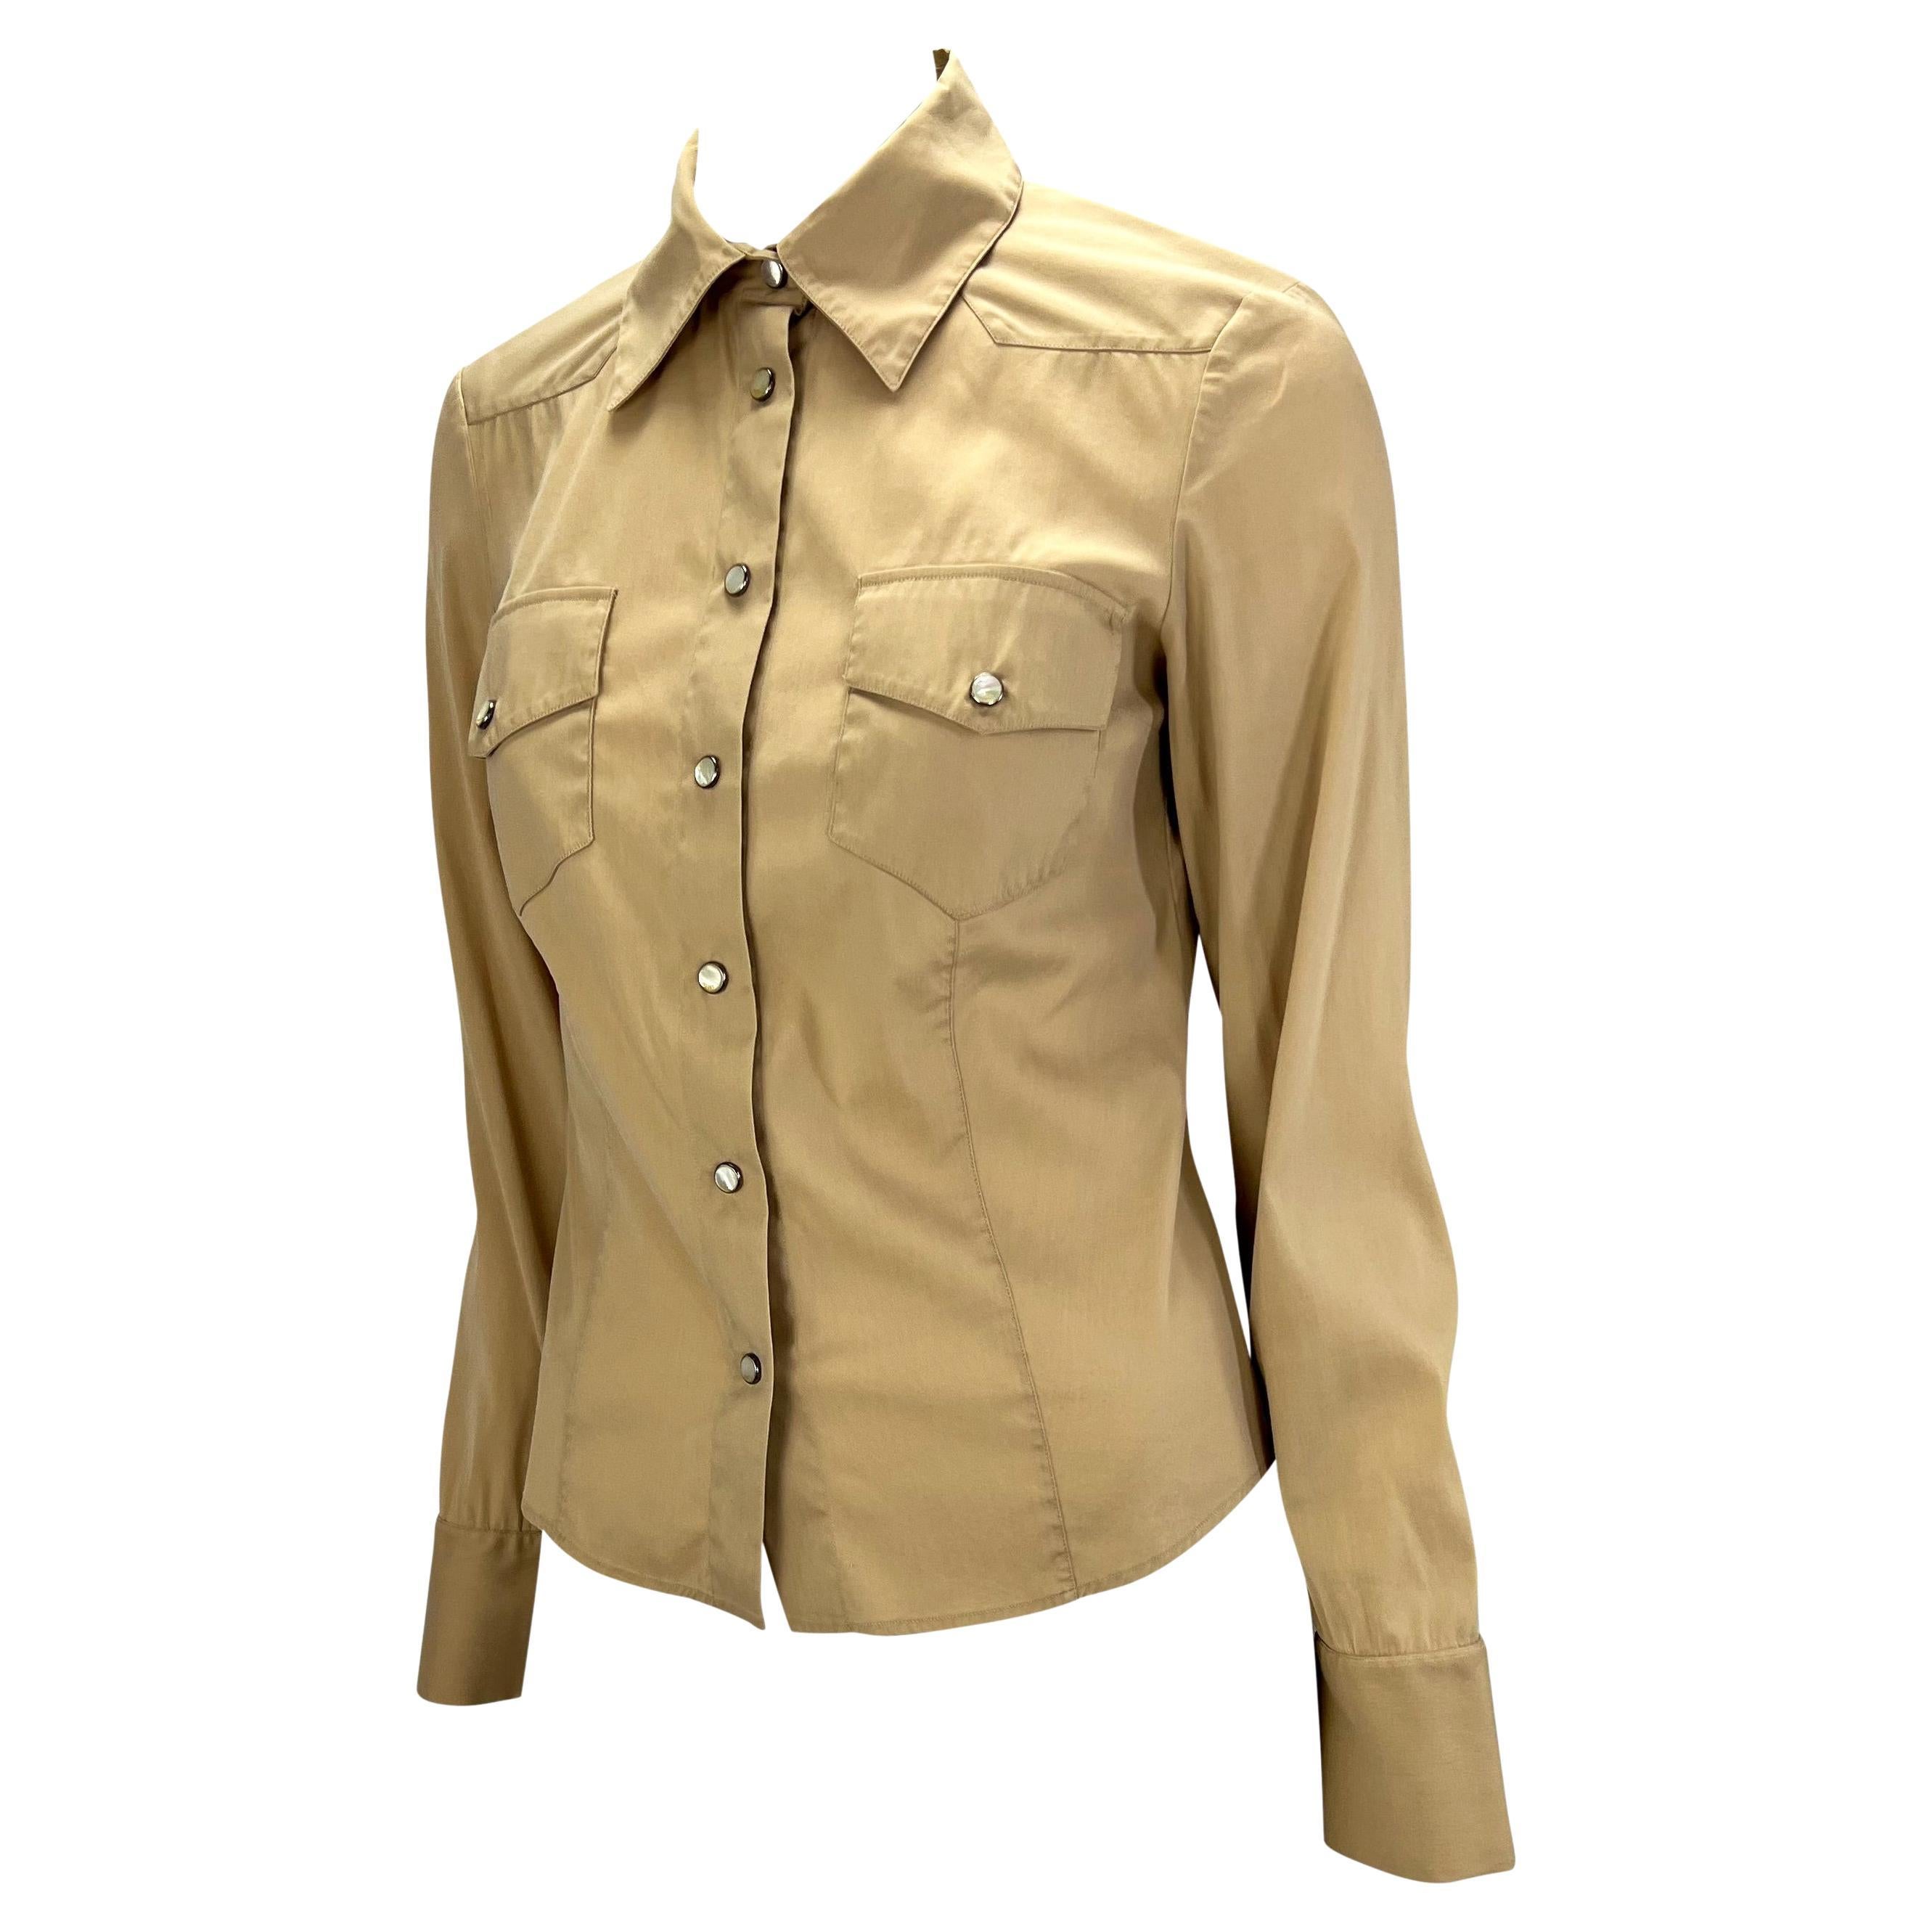 TheRealList presents: a sand-colored collared shirt with mother of pearl snap closure designed by Tom Ford for Gucci's Spring/Summer 2002 collection. Two snap pockets at the bustline accent the tapered western construction of this stretch blouse.